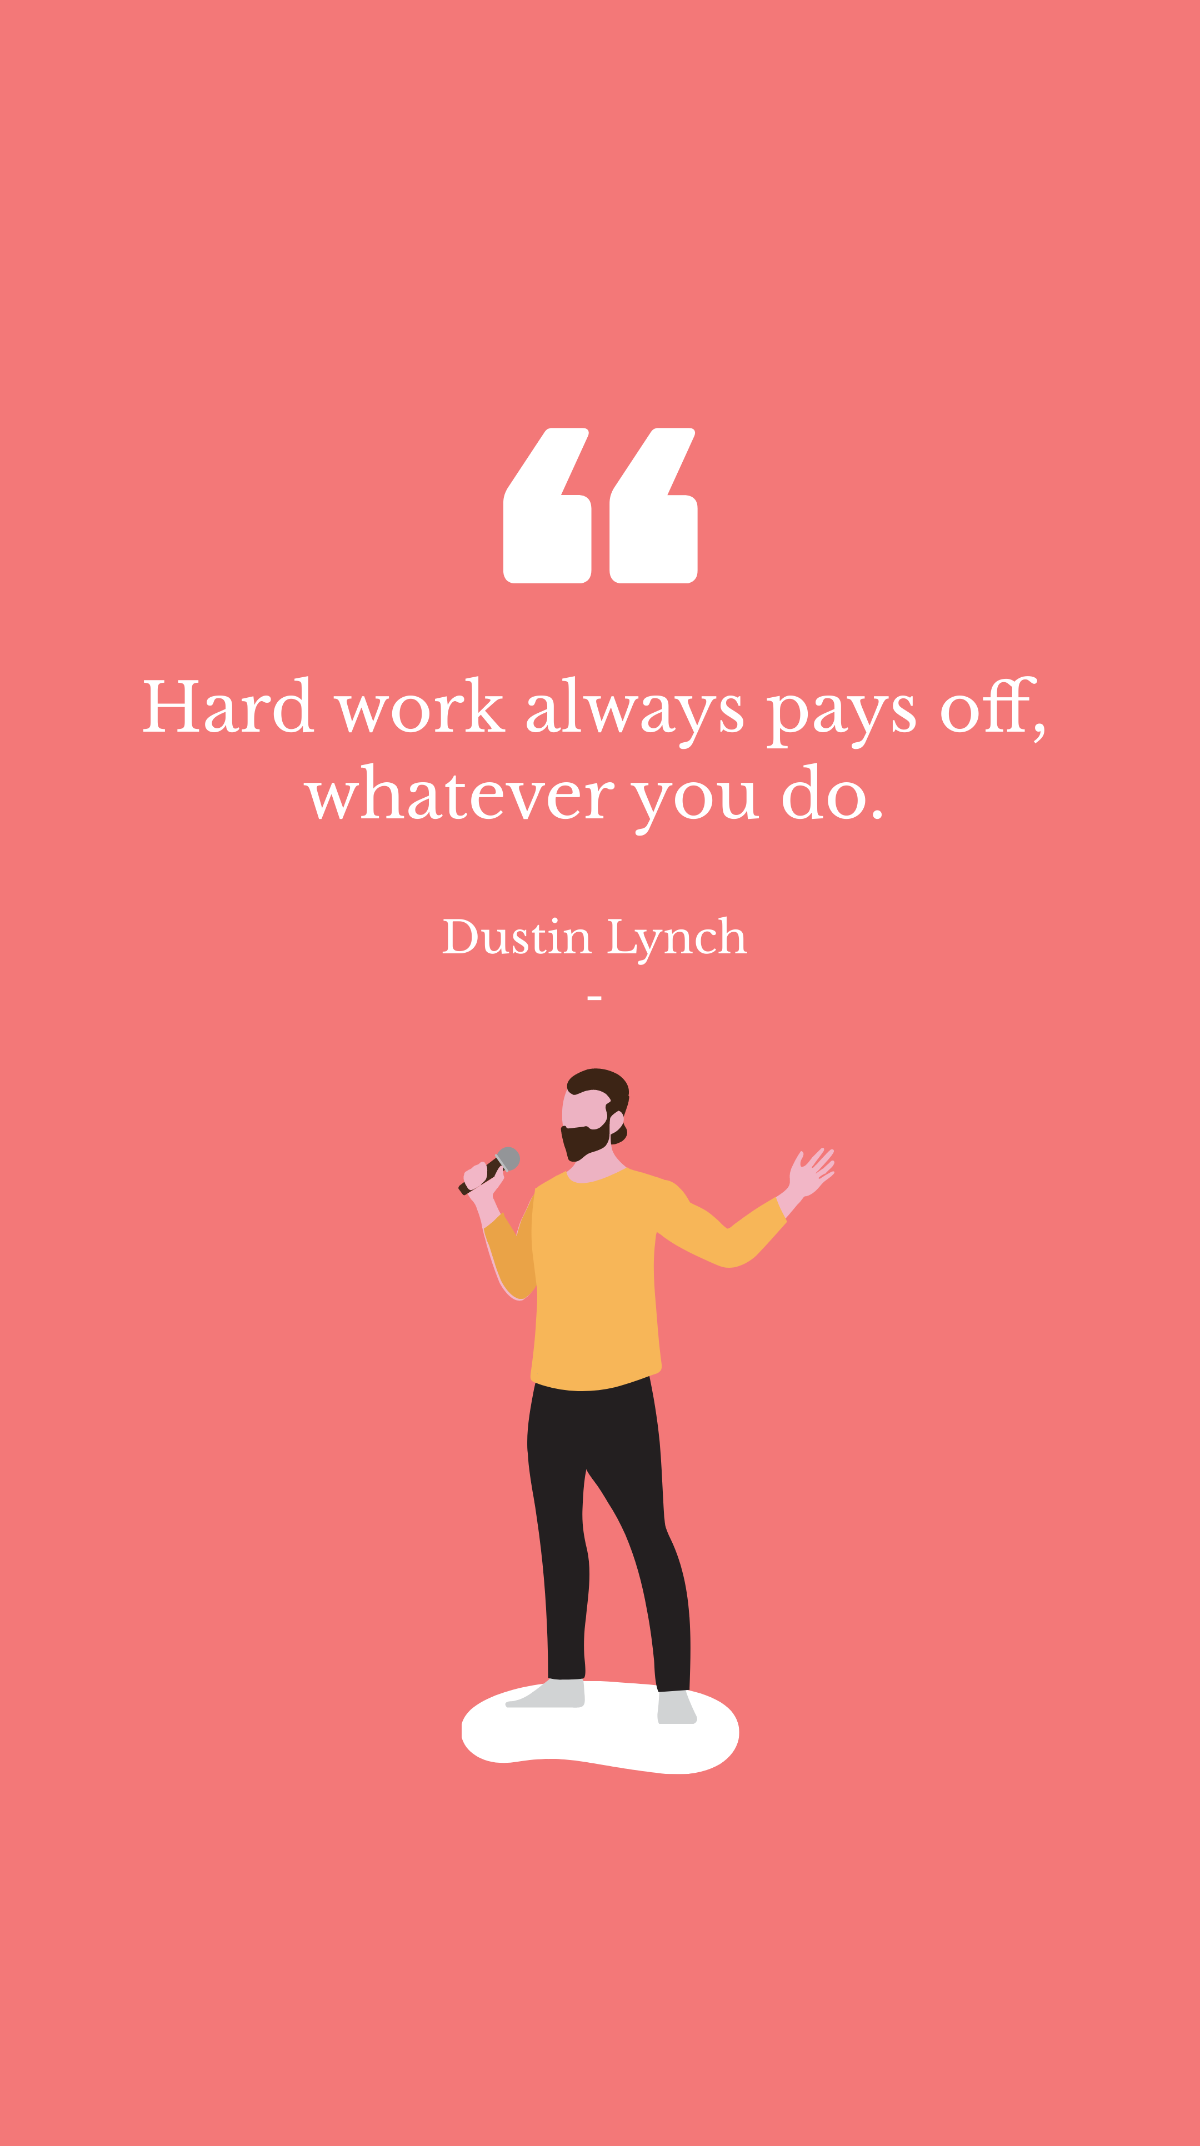 Dustin Lynch - Hard work always pays off, whatever you do.